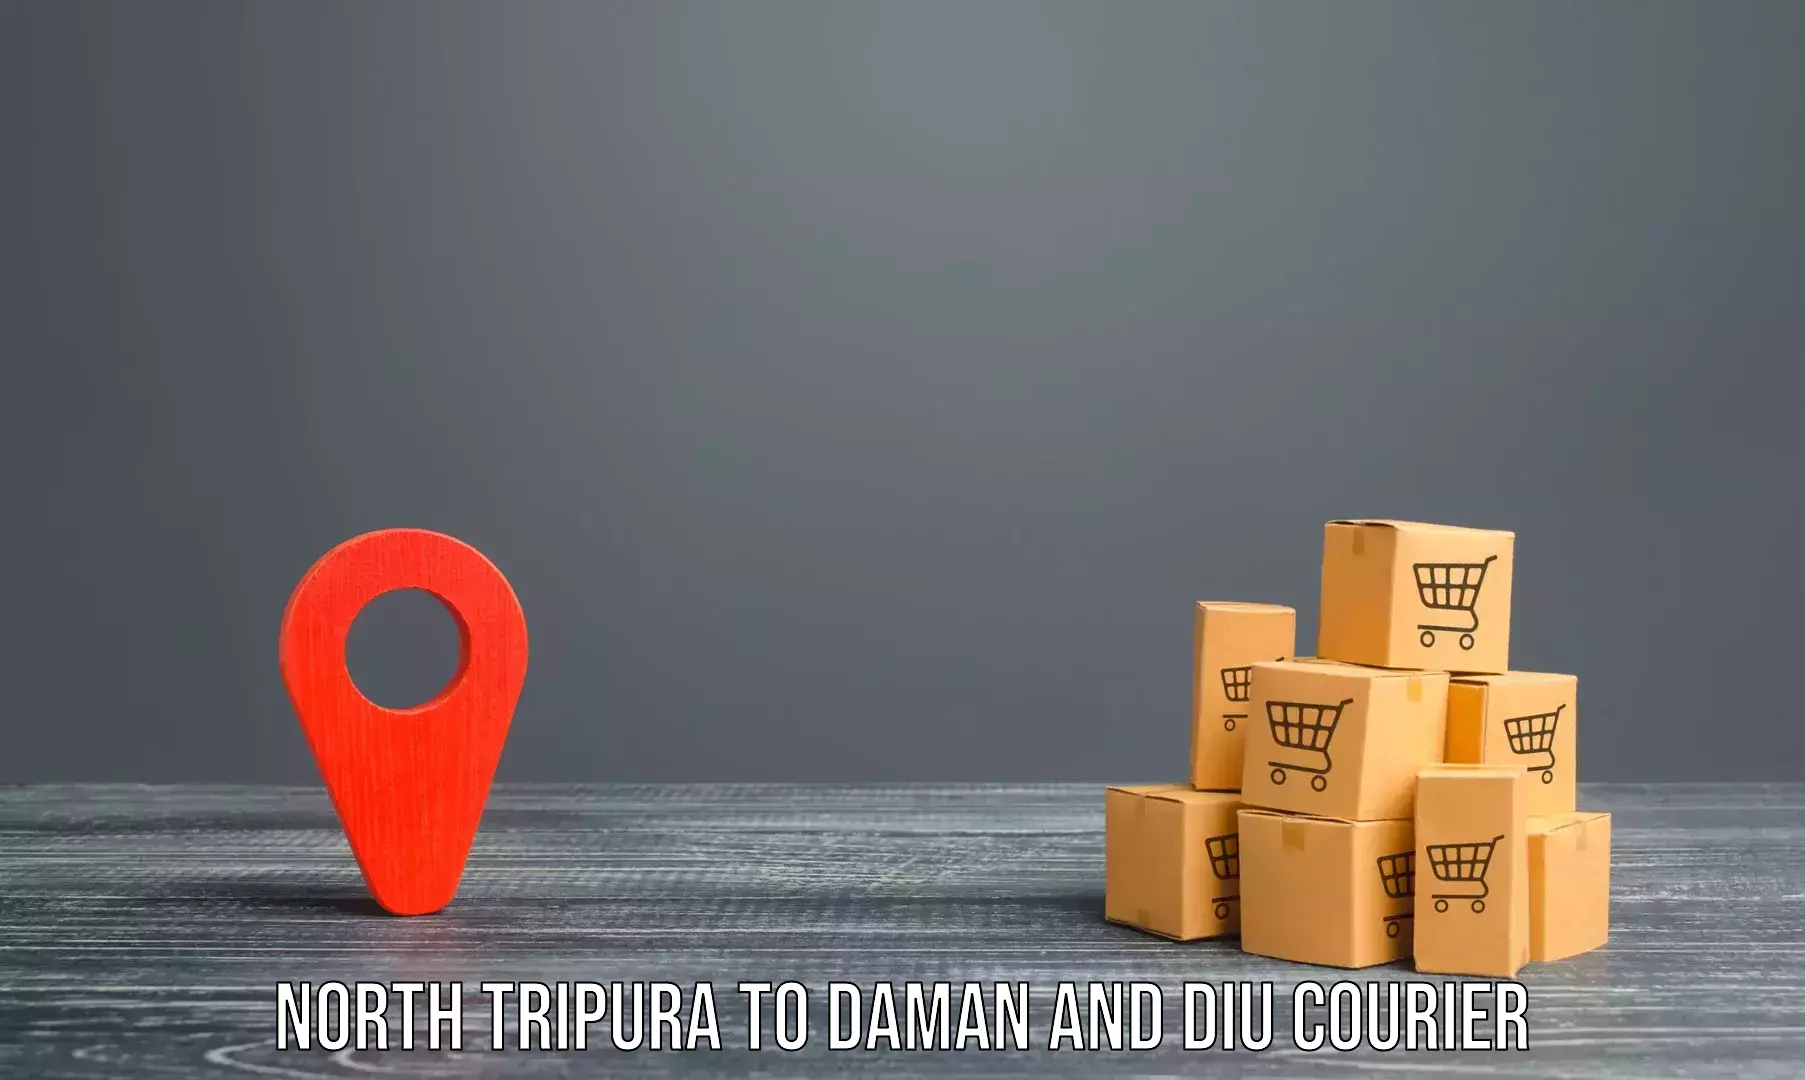 Professional relocation services North Tripura to Diu